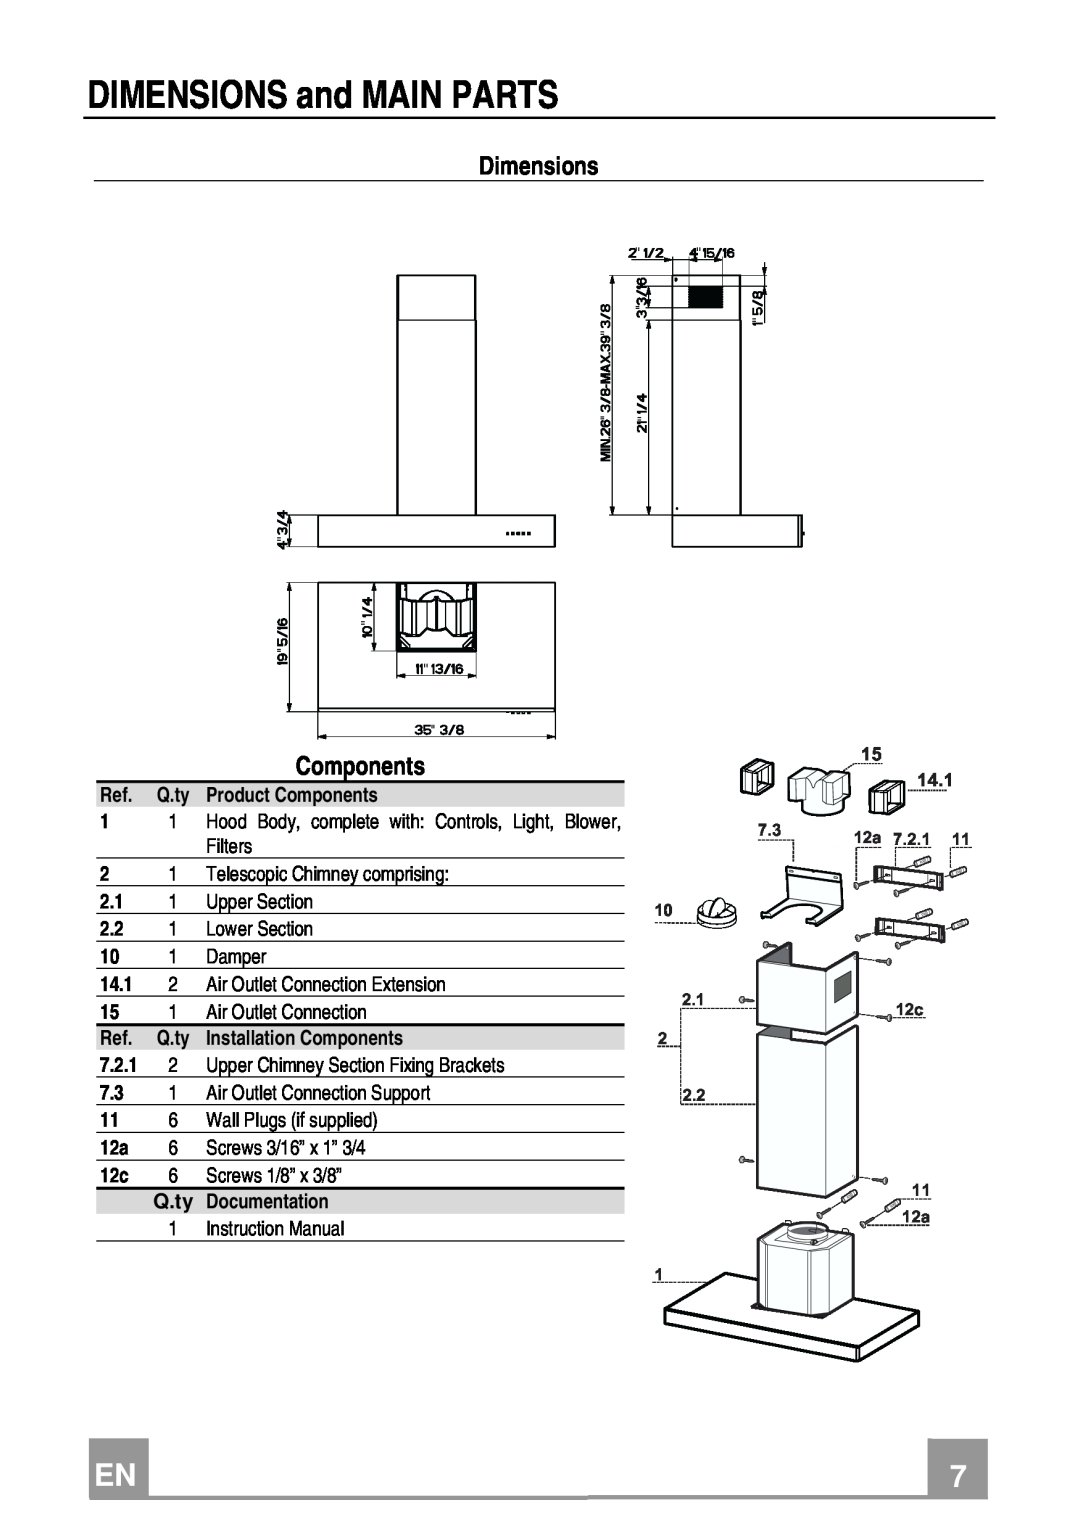 Franke Consumer Products FDF 364 W installation instructions DIMENSIONS and MAIN PARTS, Dimensions, Components 